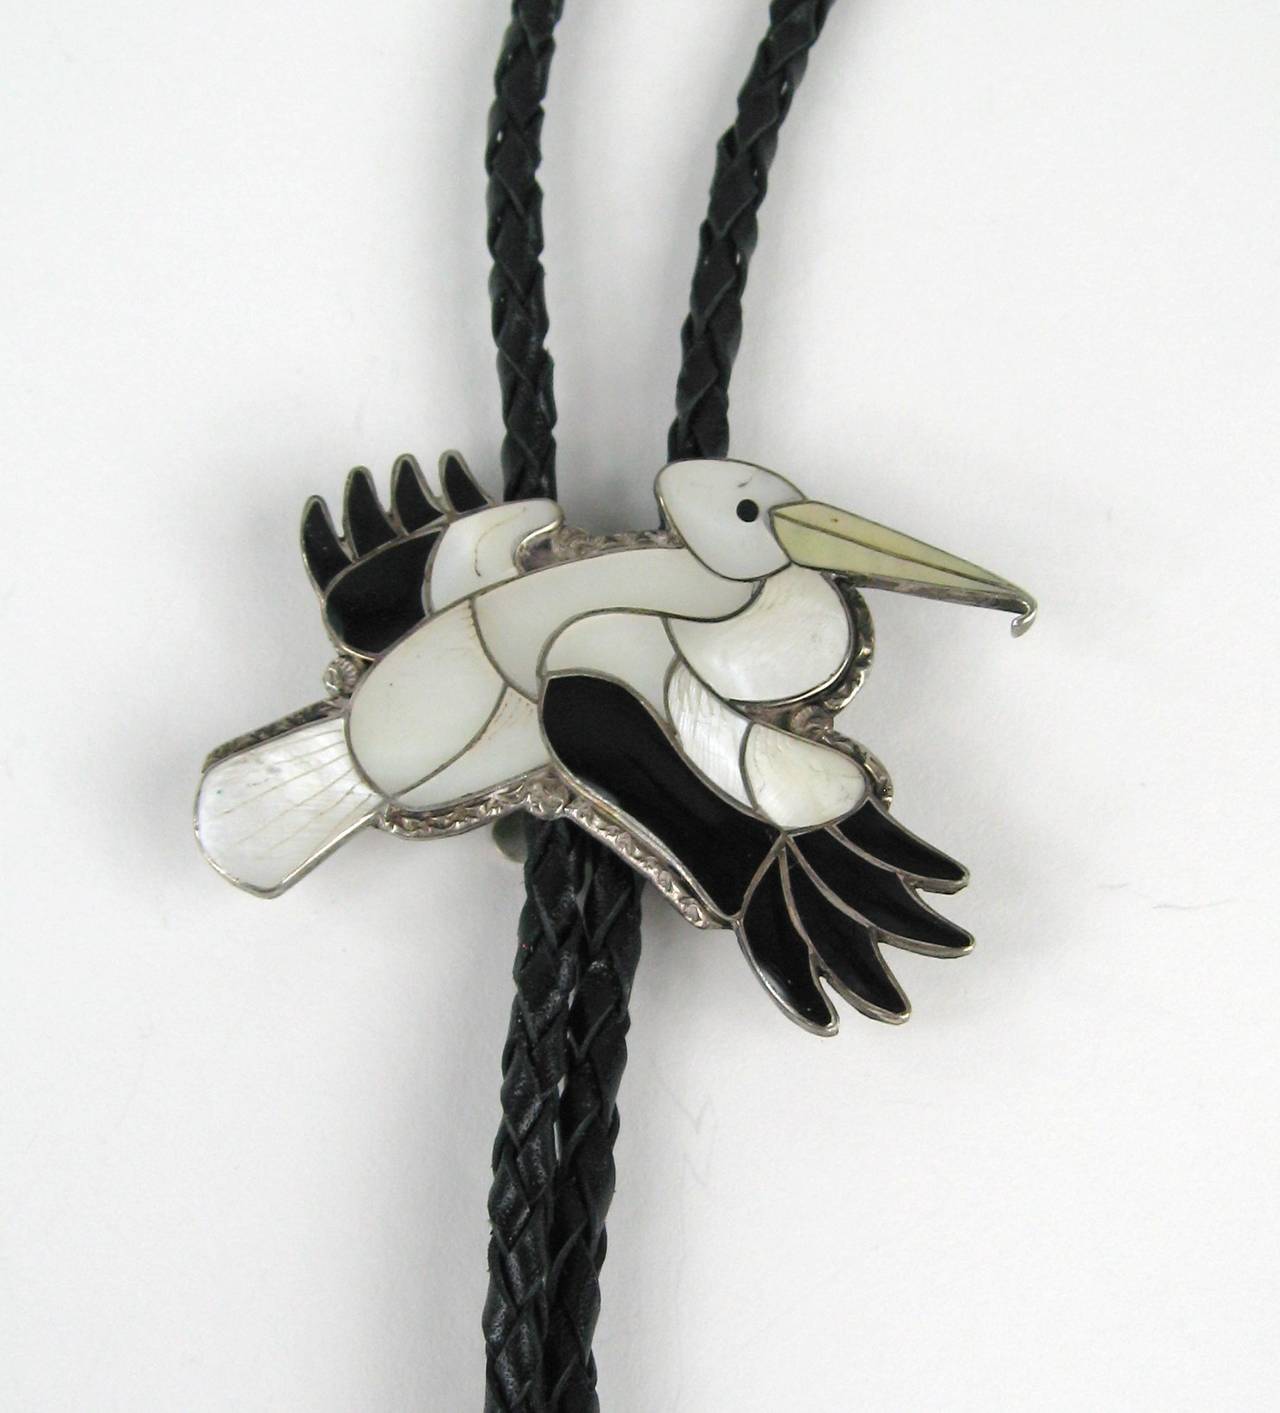 This is a fantastic vintage Native American handmade Bolor featuring a wonderful Bird. The inlay work is amazing!
artists Porfilio and Ann Sheyka. Porfilio and Anne are known for their animal designs and this is among the best. The detail that they